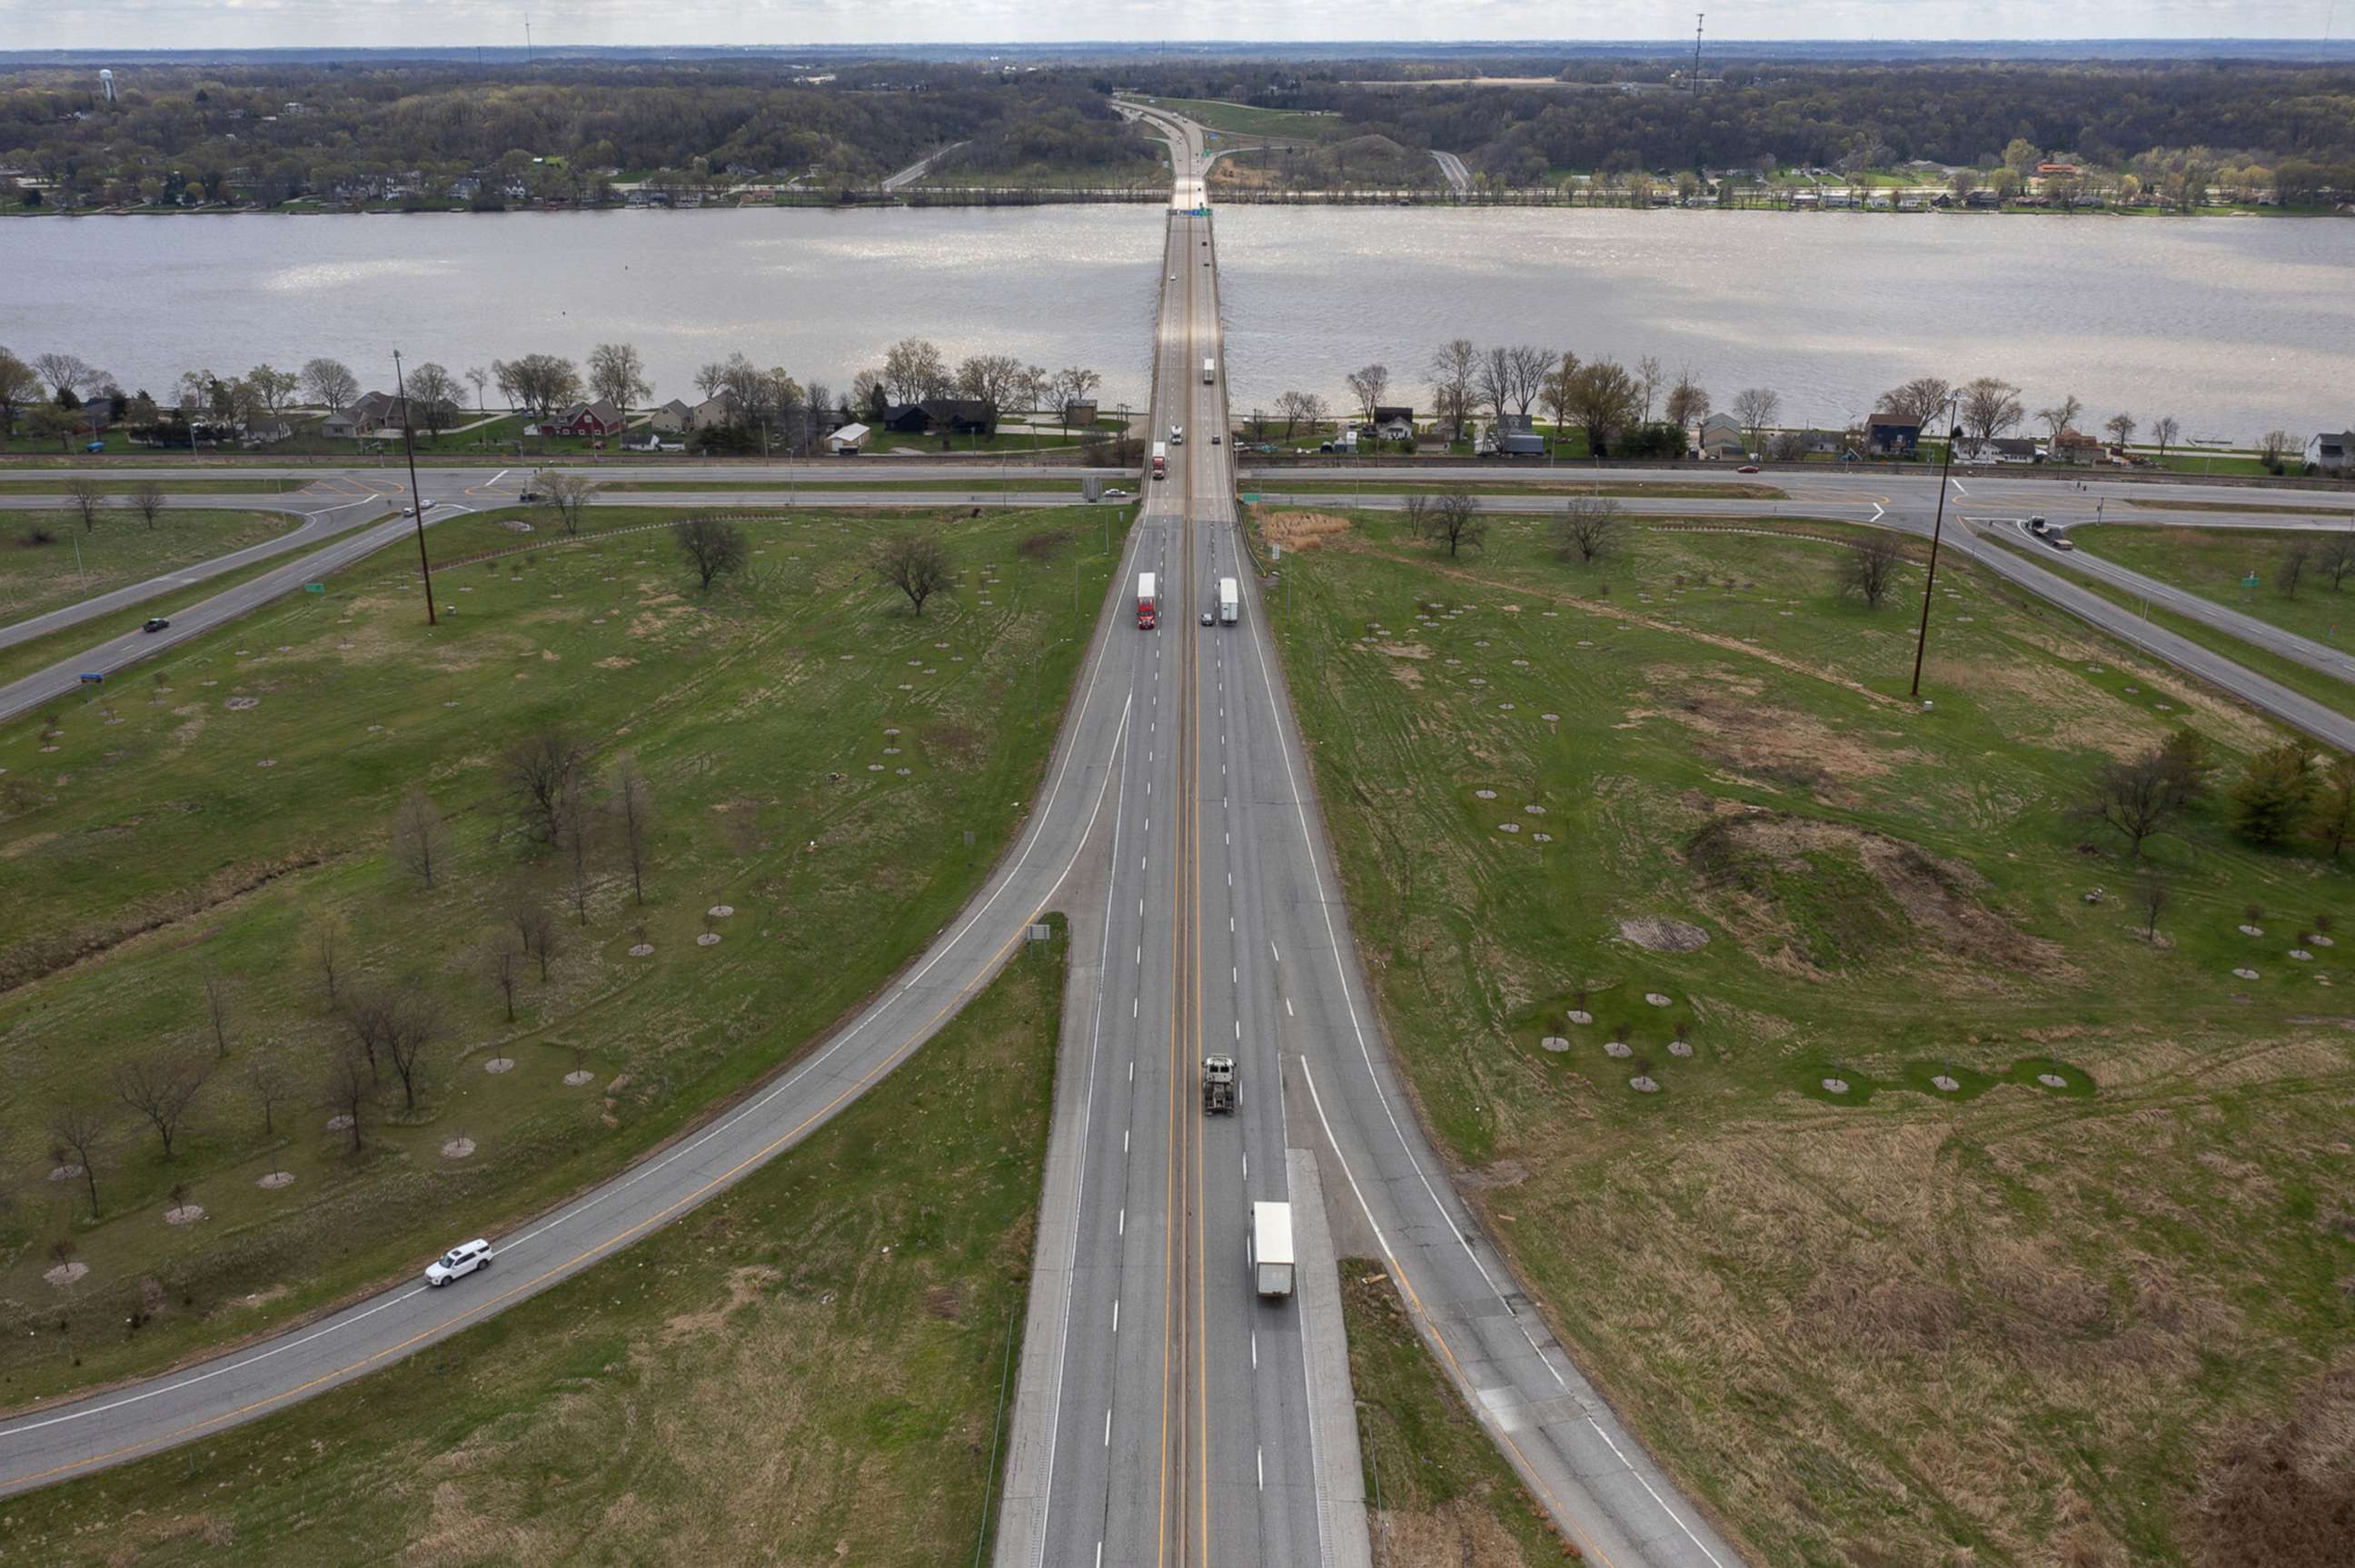 PHOTO: In this April 12, 2021, file photo, the Interstate 80 bridge over the Mississippi River between Iowa and Illinois is shown in Le Claire, Iowa.